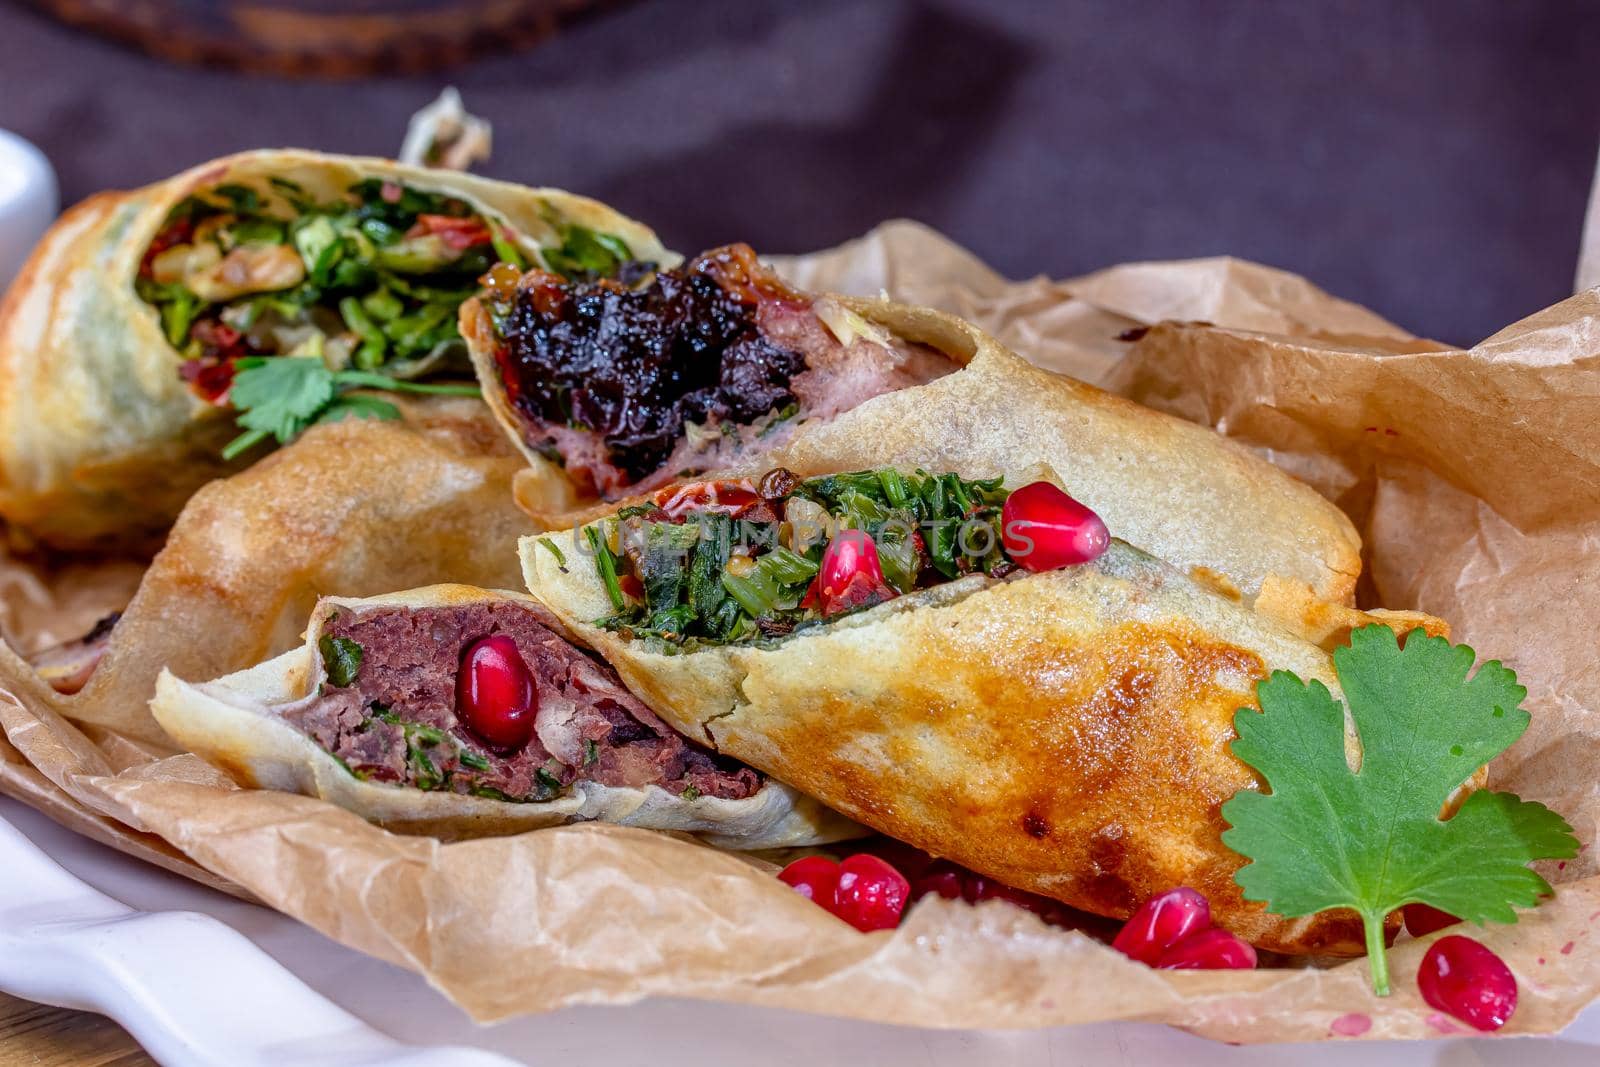 Deep fried spring rolls made it from spring roll pastry,vermicelli,carrots,cabbage,sprouts,soy sauce and peppers served with sweet chilli sauce on slate plate background.Easy vegetarian food. by Milanchikov